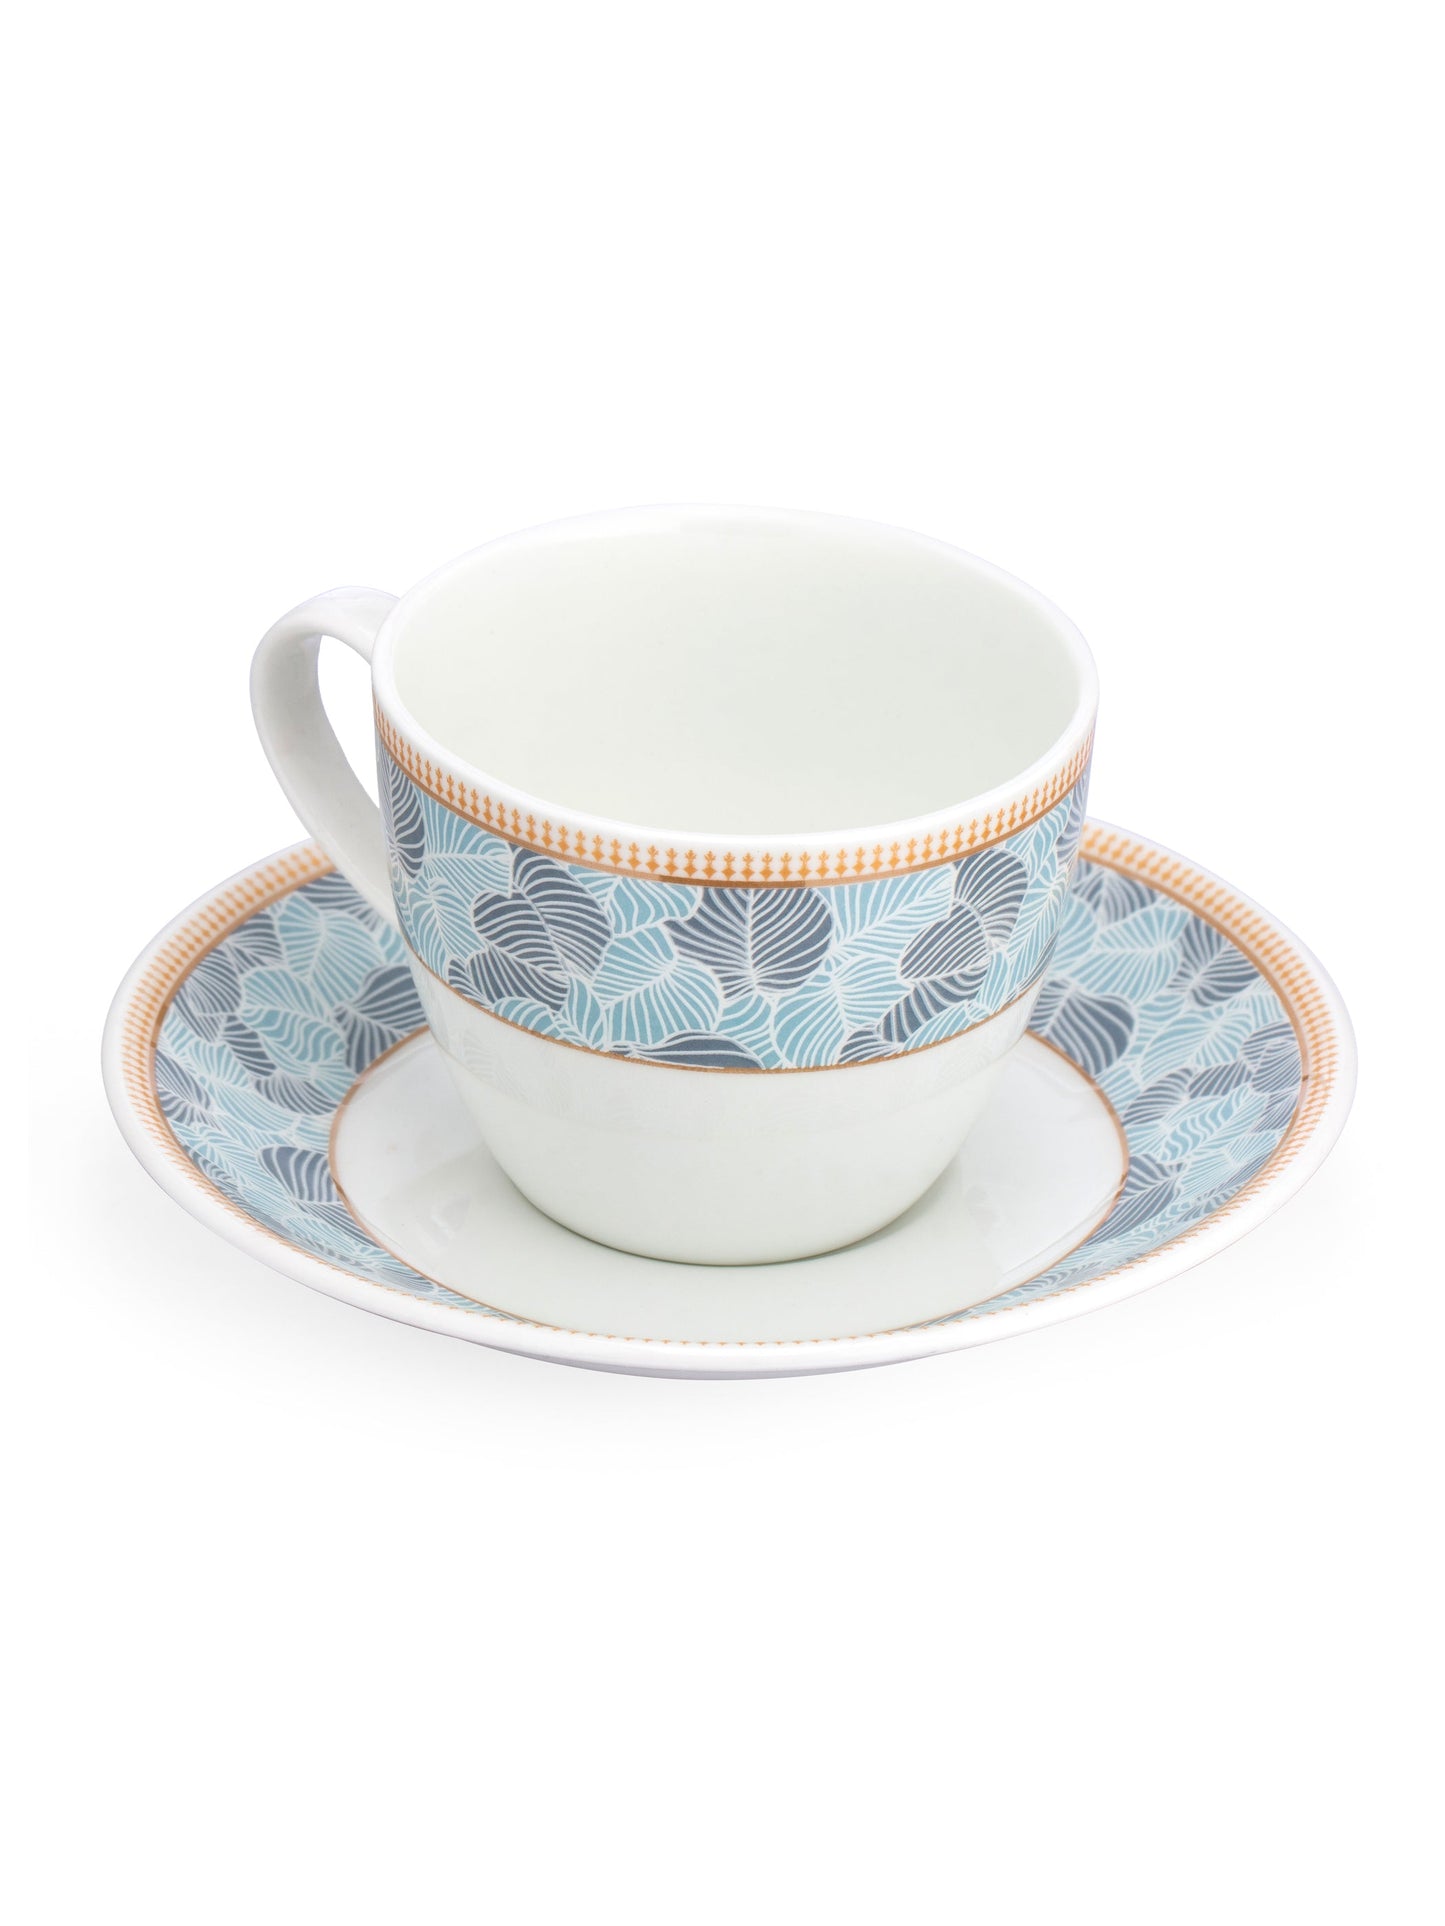 Cream Super Cup & Saucer, 210ml, Set of 12 (6 Cups + 6 Saucers) (S366)